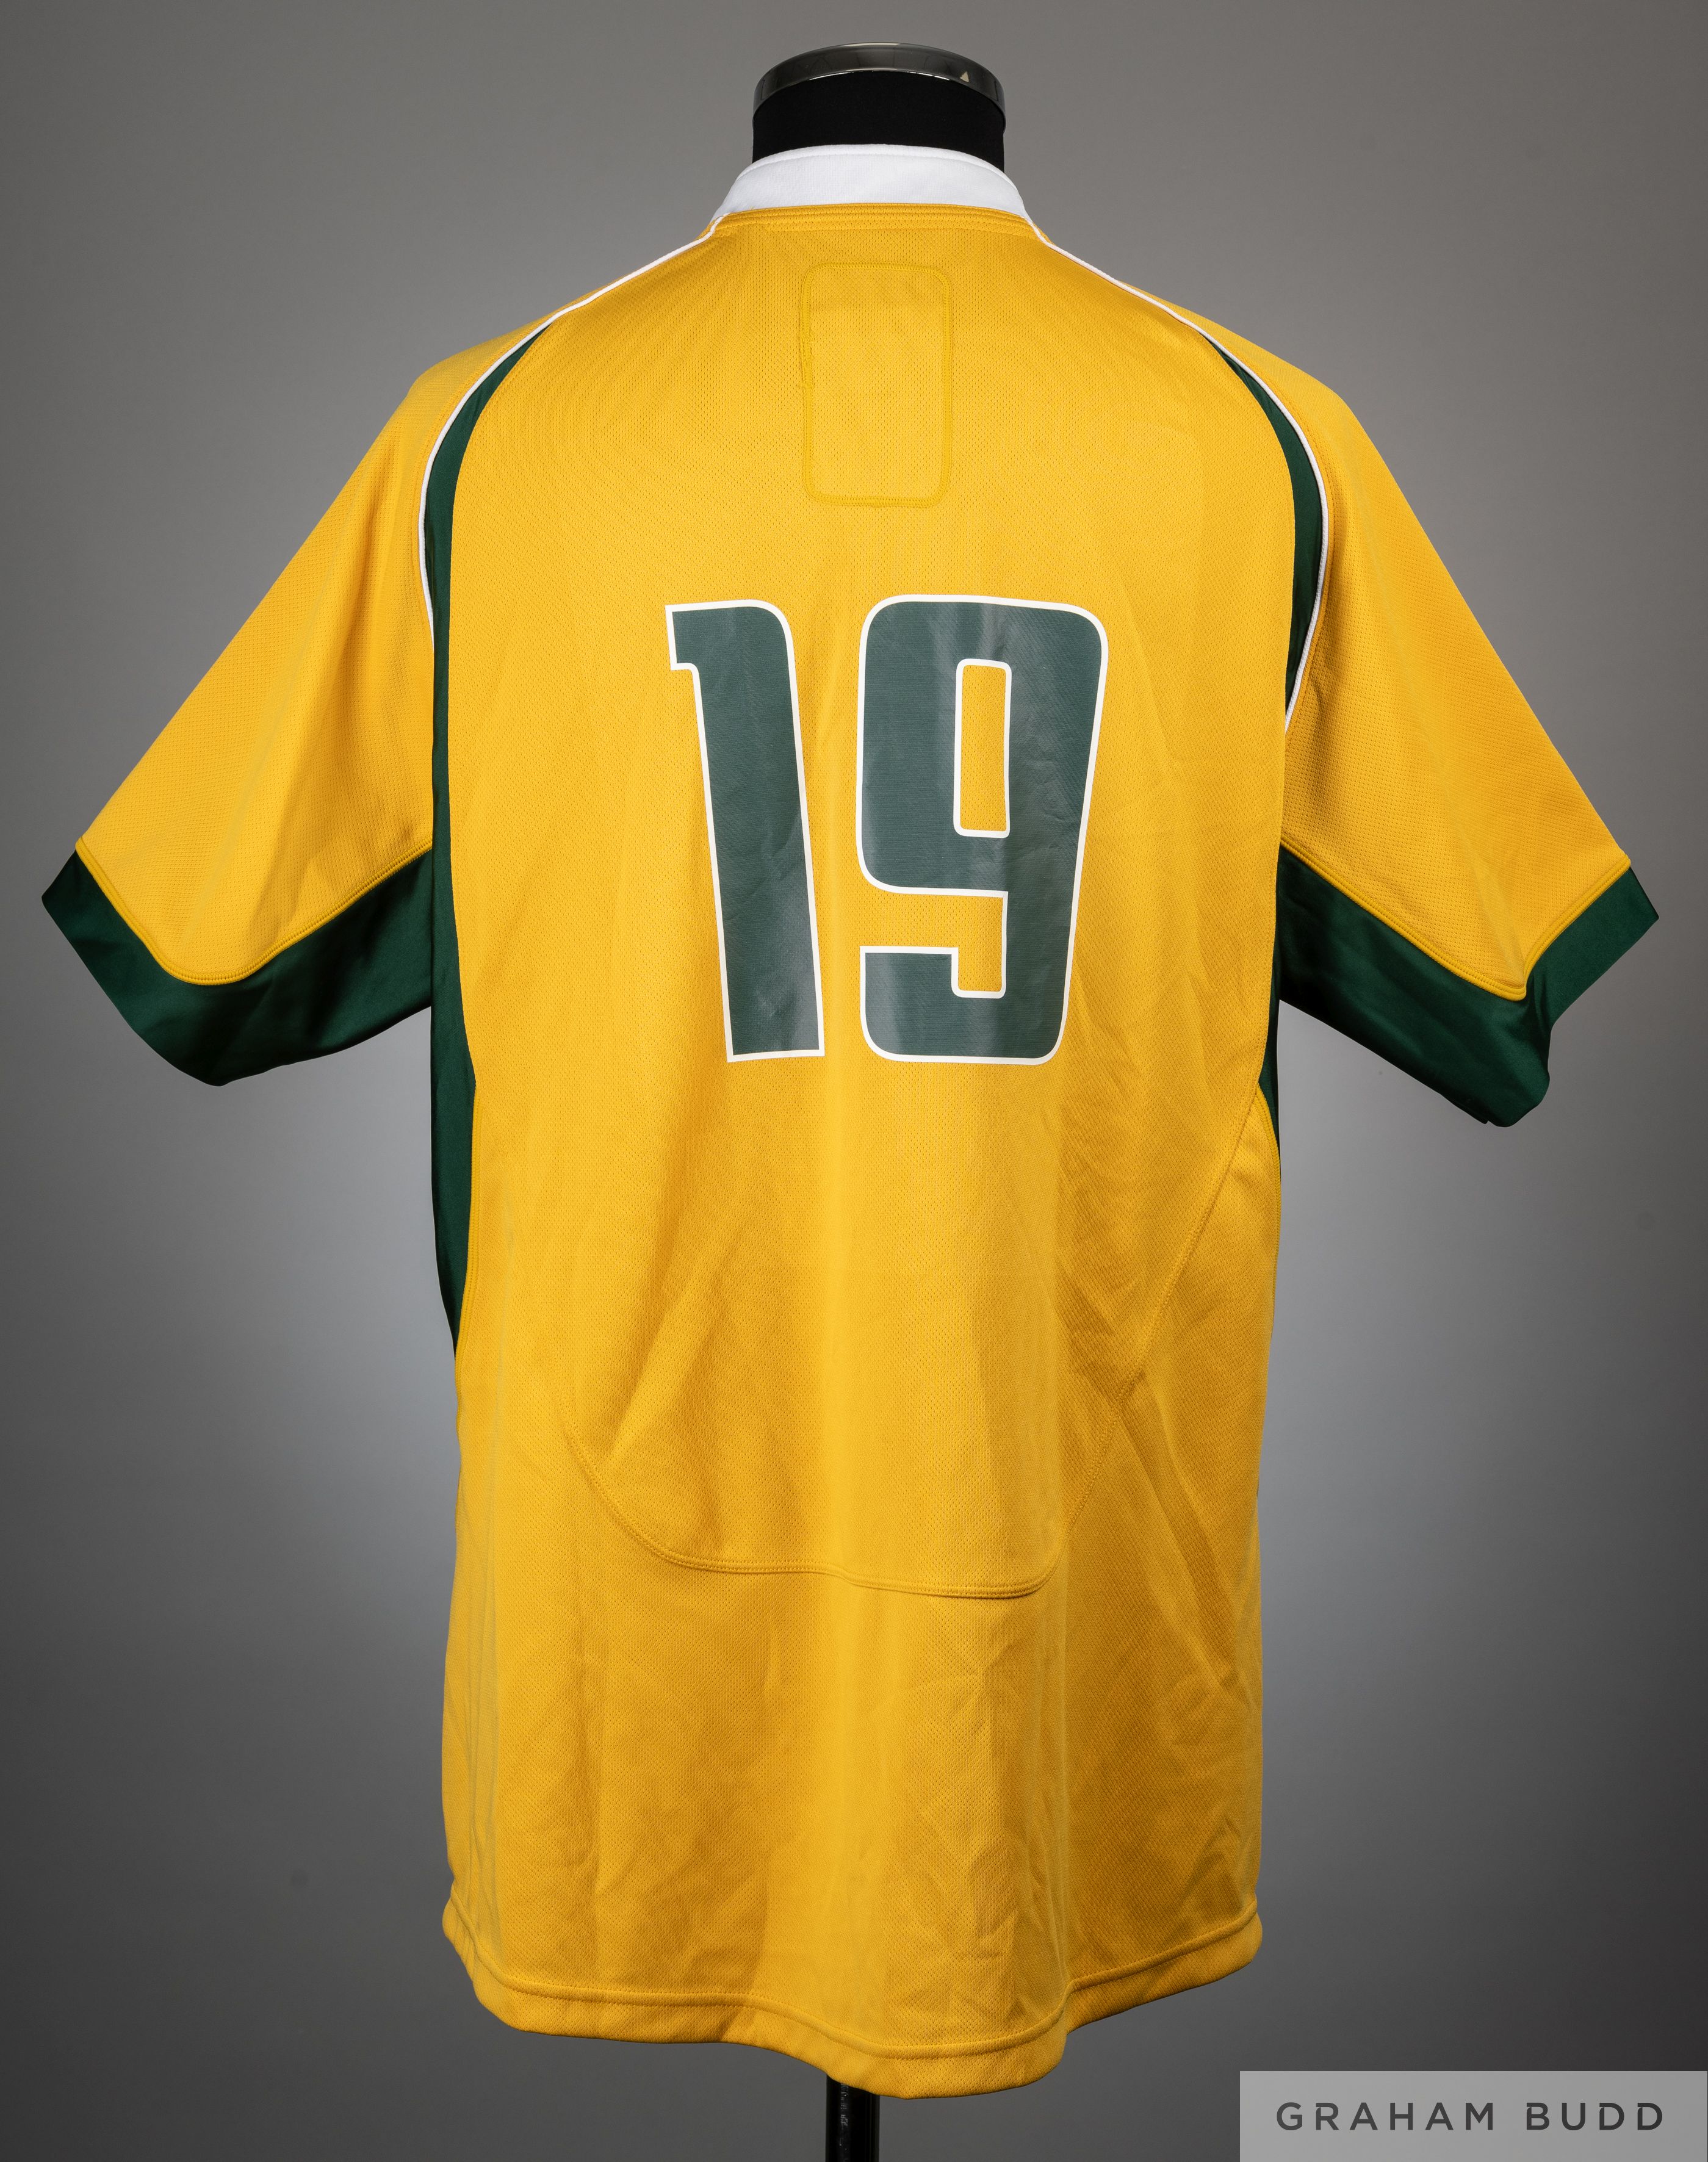 Will Skelton gold and green Australia no.19 shirt, 2014 - Image 2 of 2